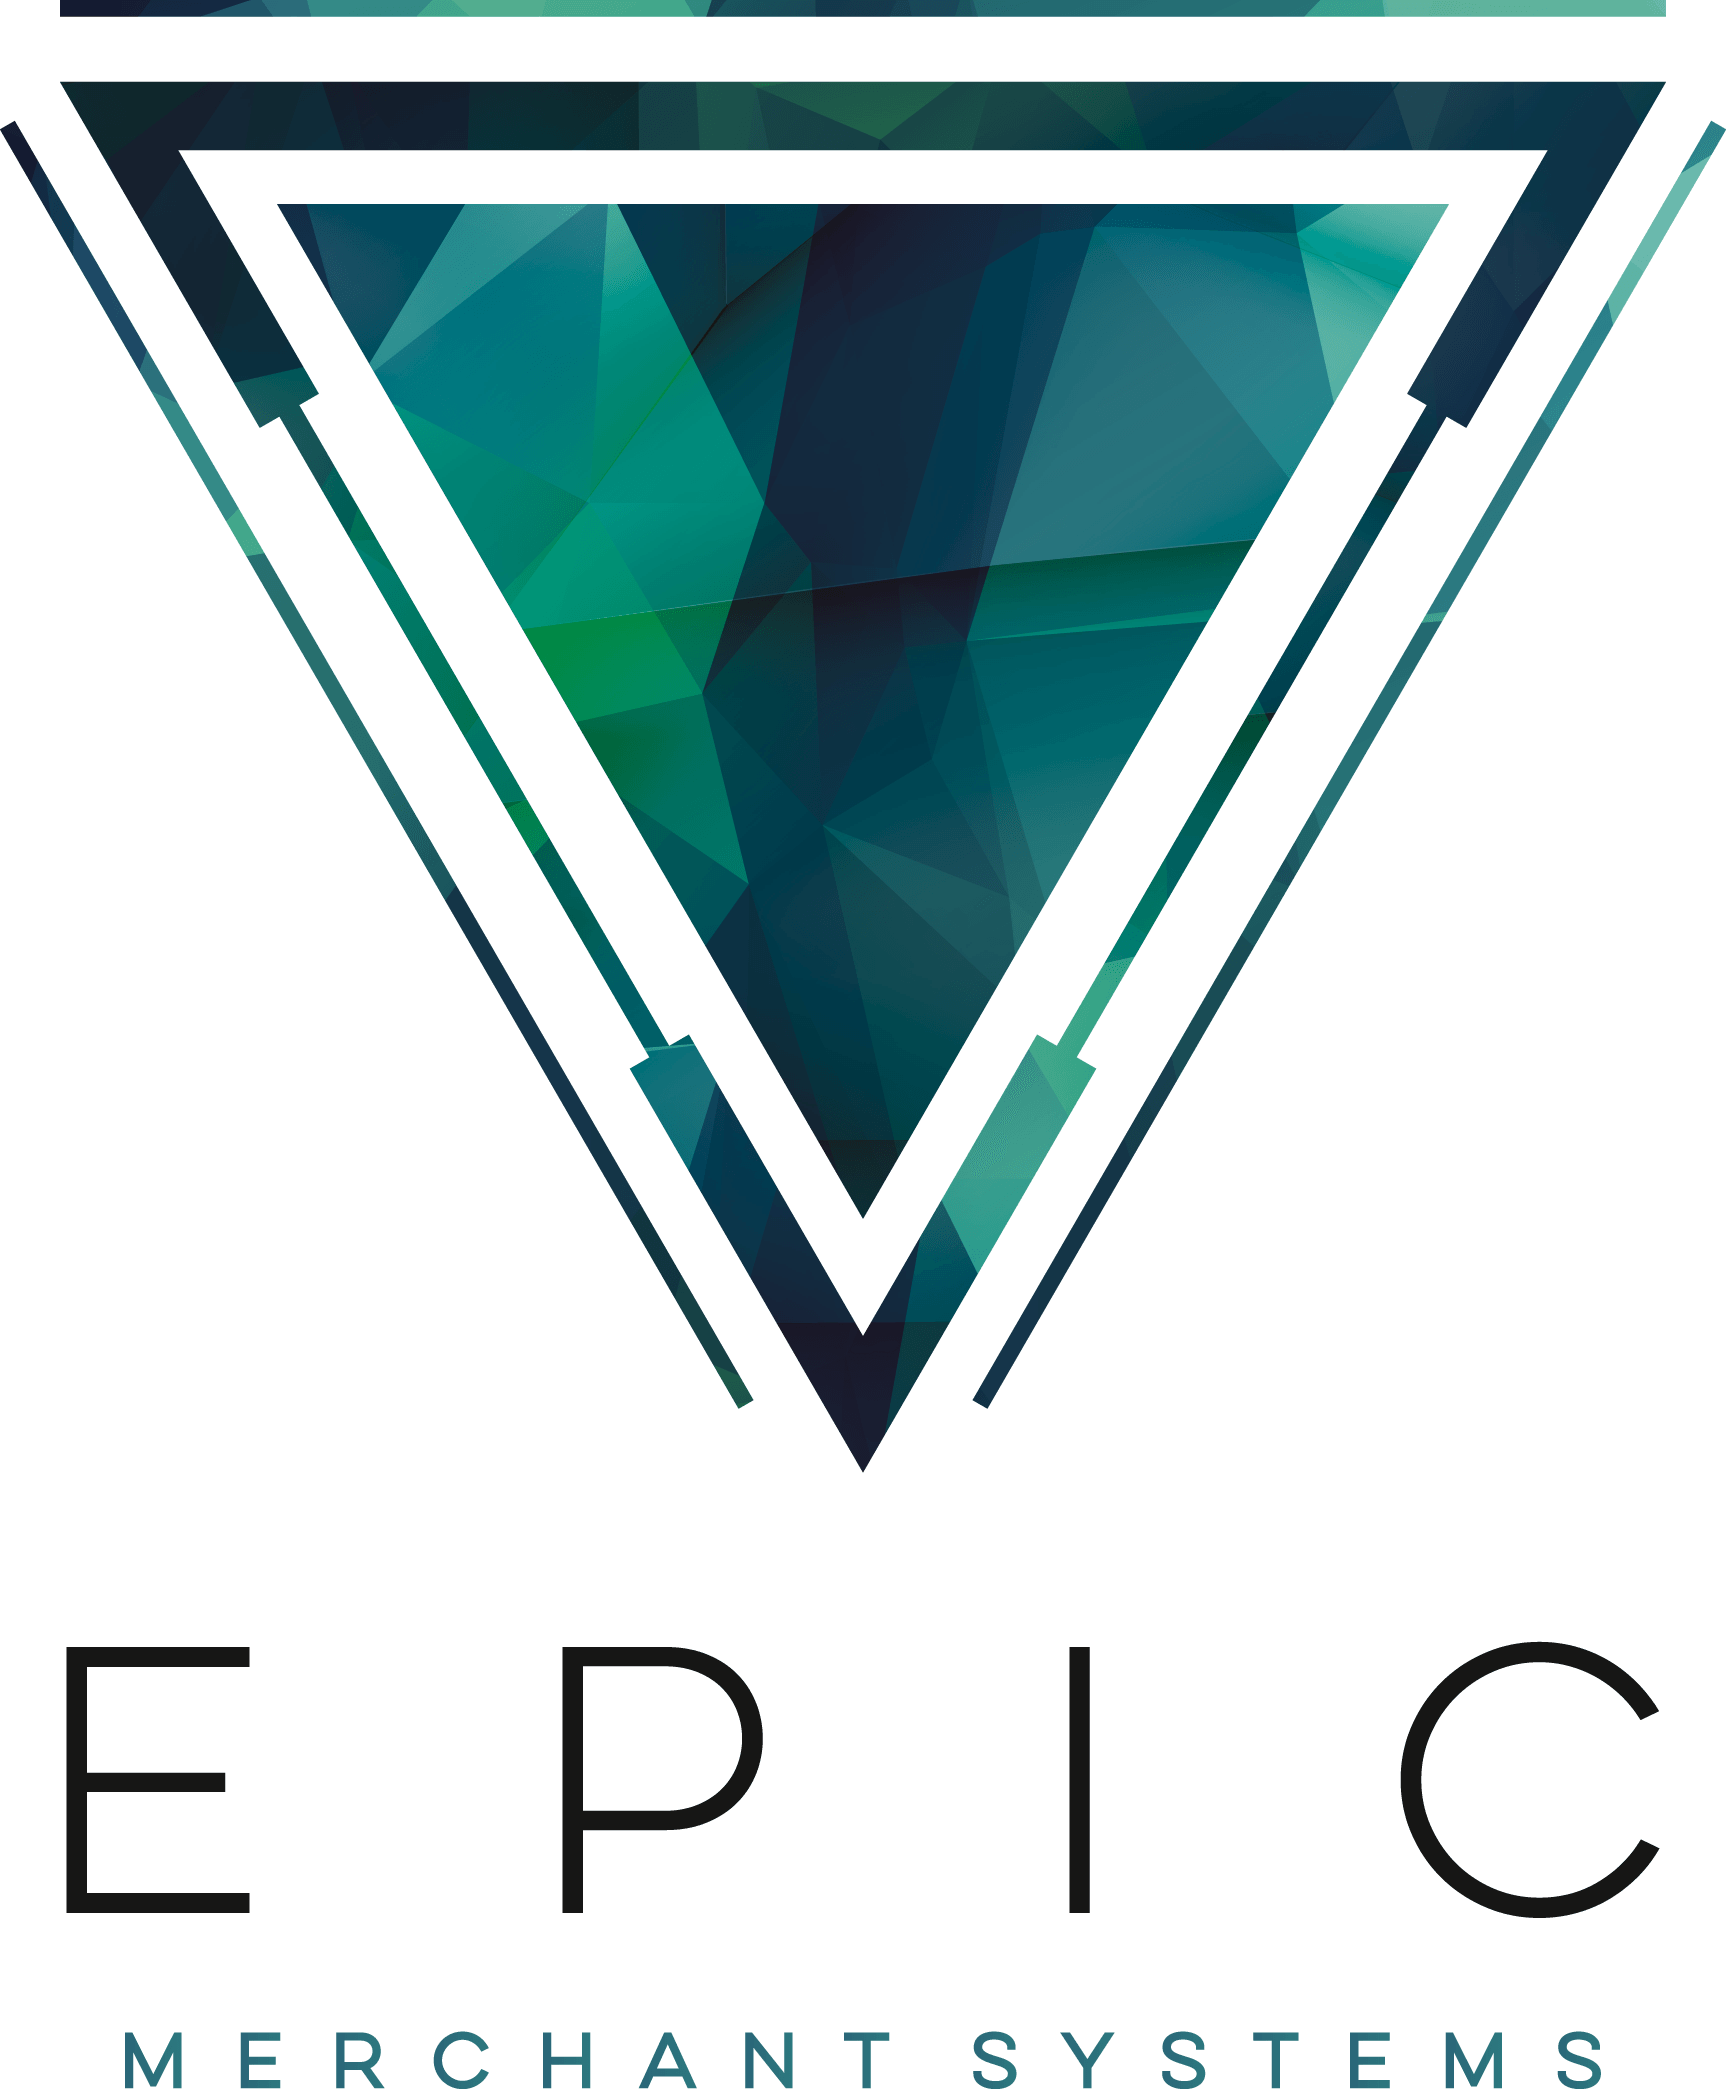 A logo for epic merchant systems with a triangle in the middle